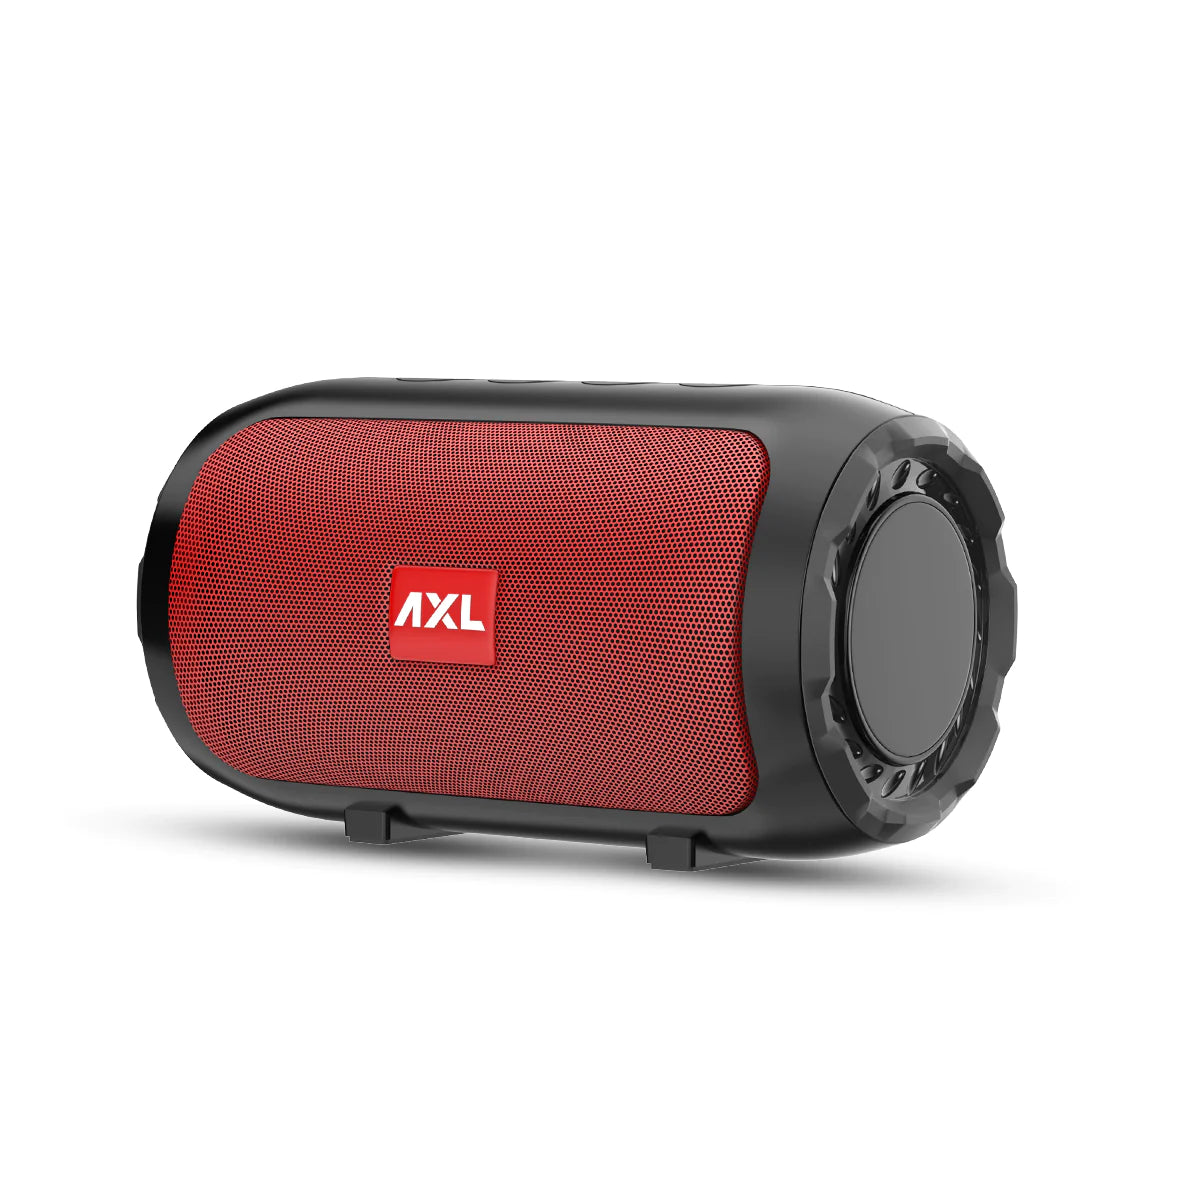 AXL ABT-JP101 5W Bluetooth Speaker with Powerful Bass, Bluetooth V5.0, TF/SD Card Slot, Aux Input, USB Support and Call Function (Grey/Black/Red/Blue)